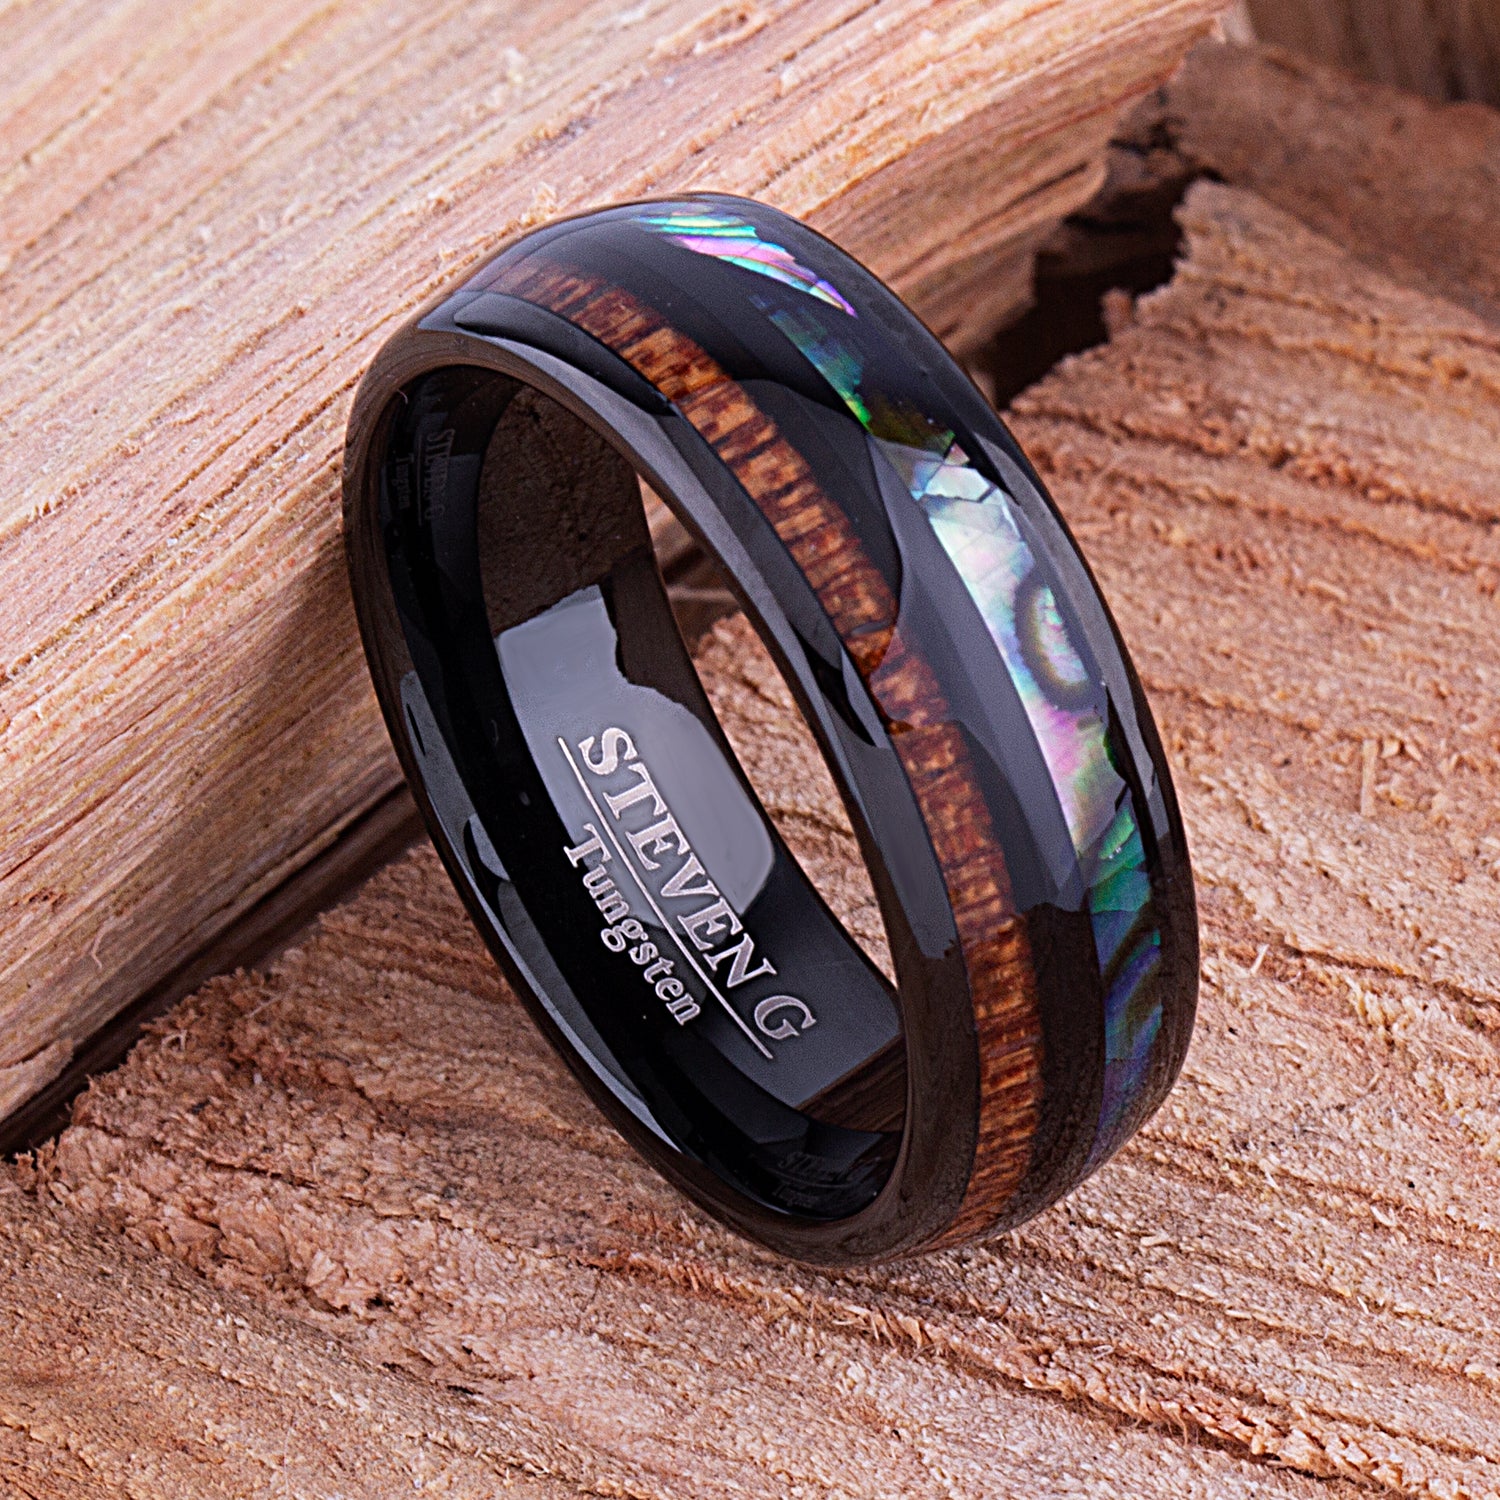 Black Tungsten Band with Koa Wood and Abalone Shell 8mm - TCR111 shell & wood engagement band or wedding ring or promise band